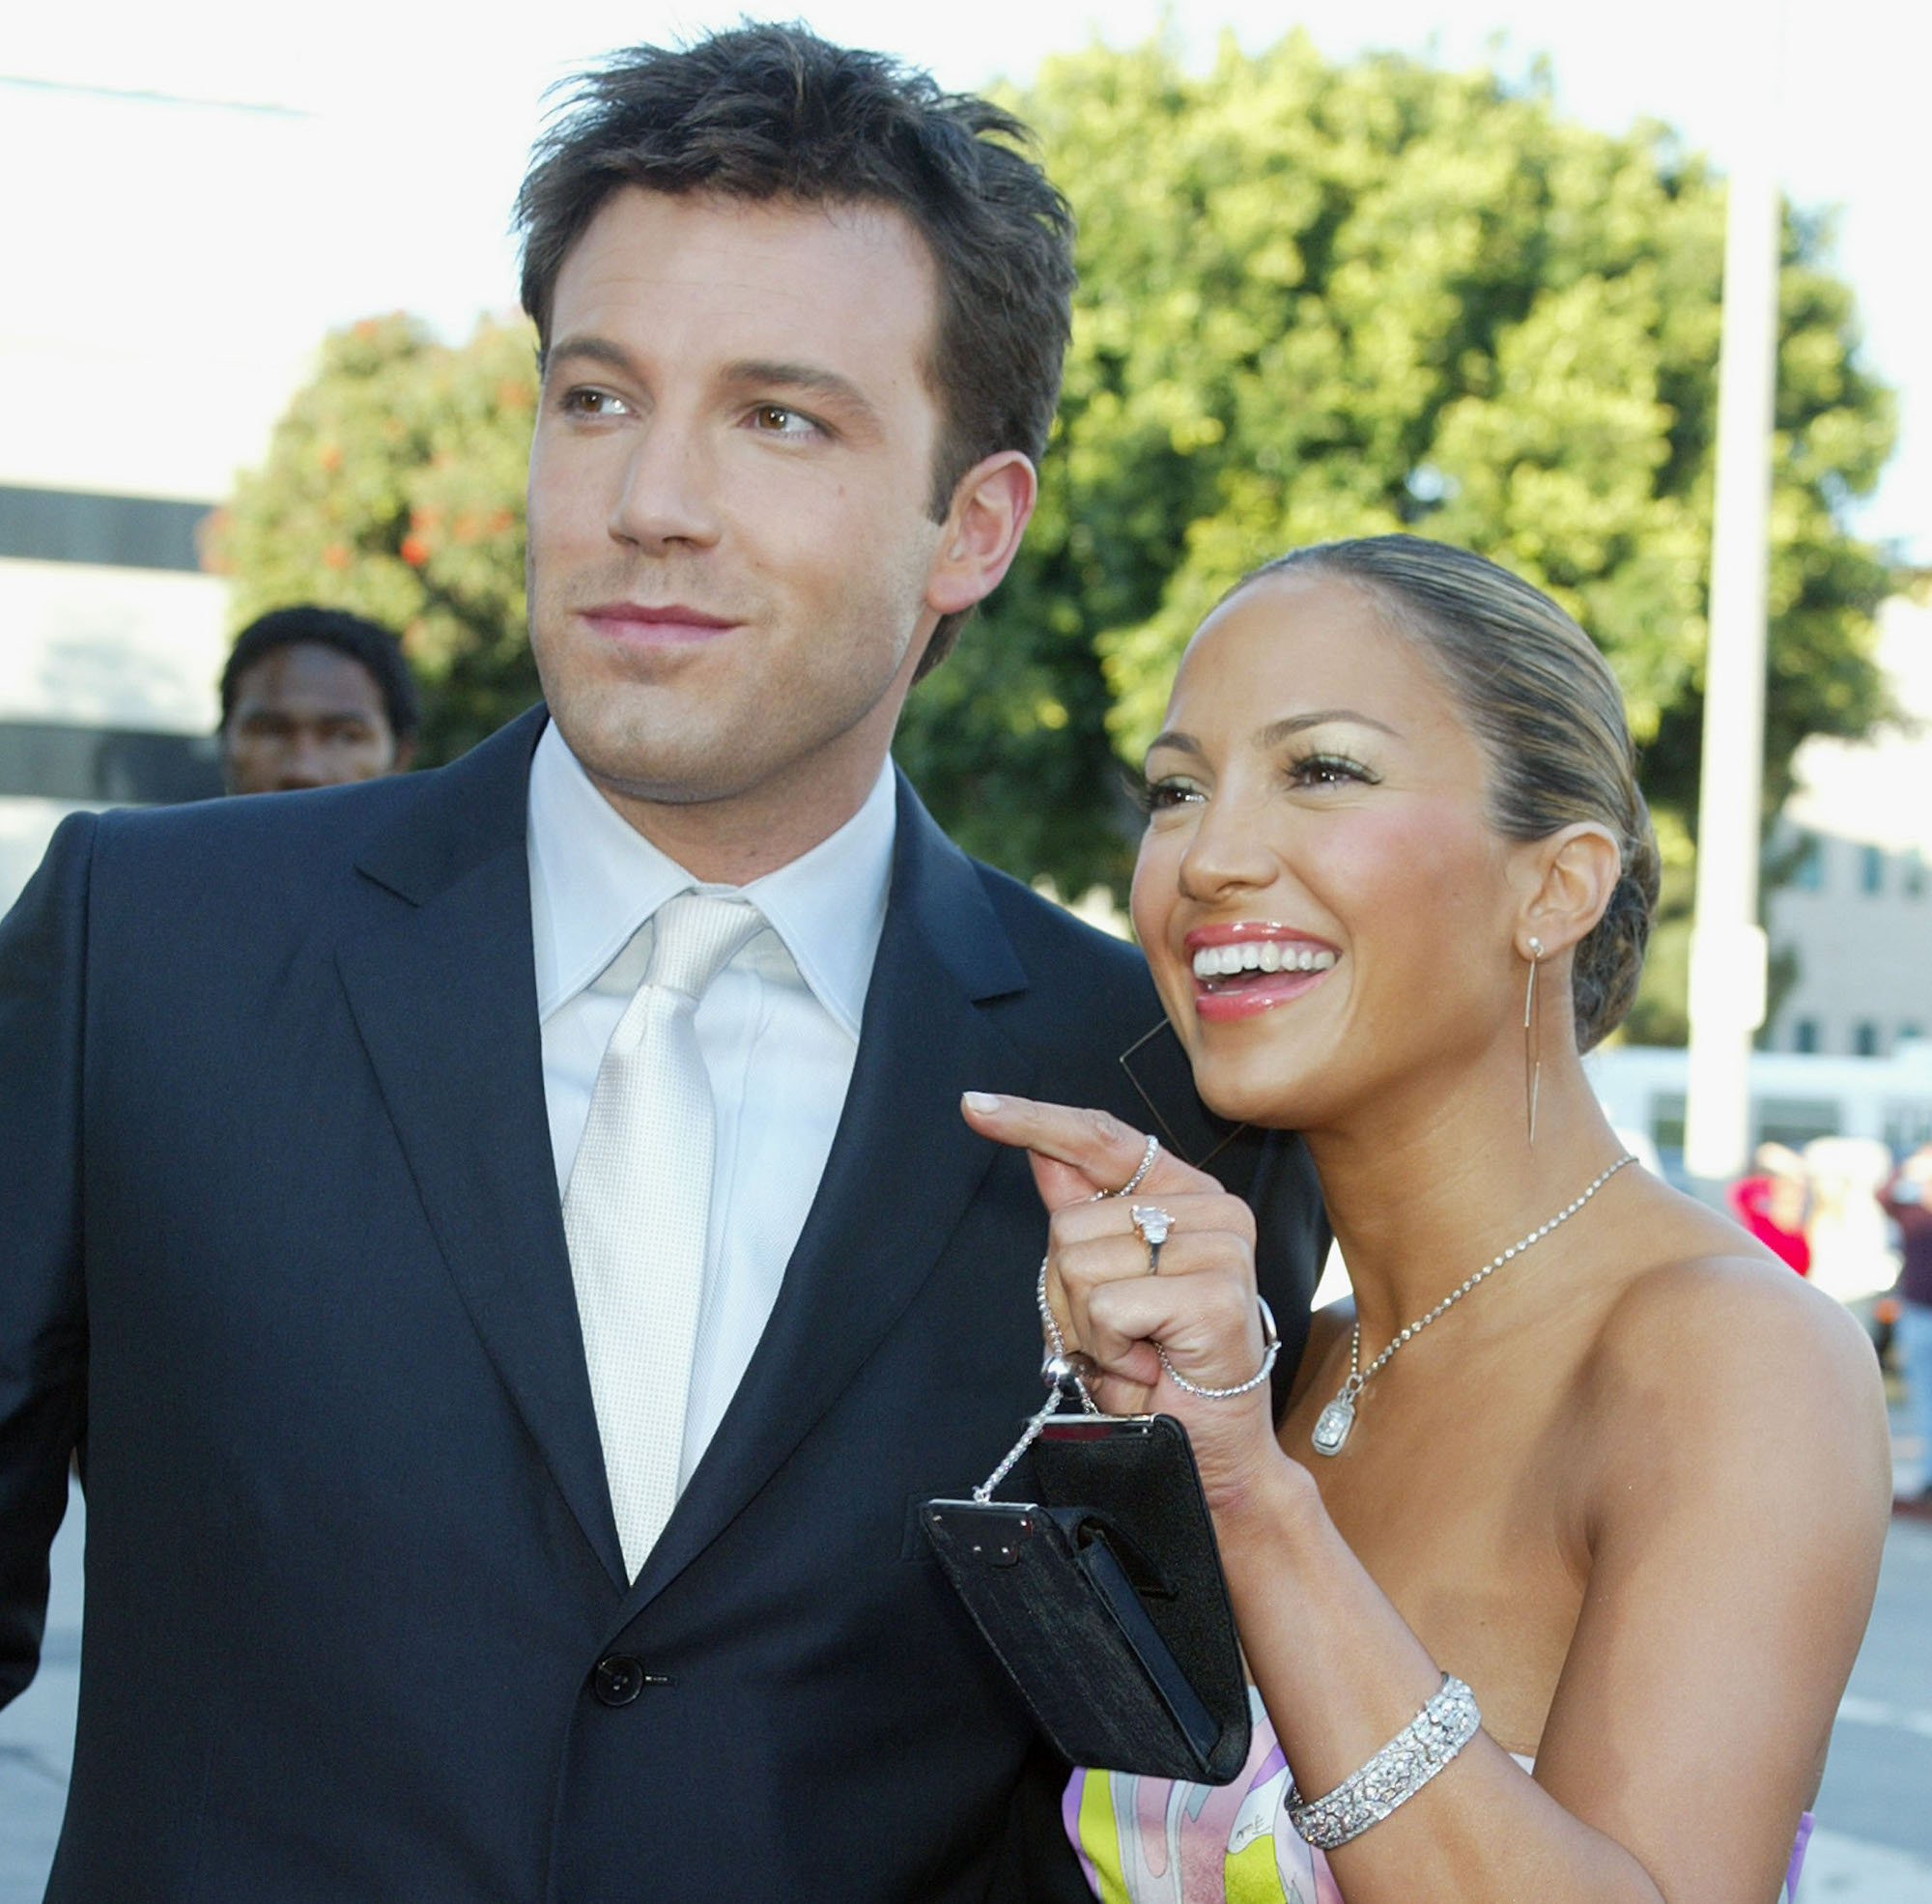 Ben Affleck and Jennifer Lopez at the premiere of 'Daredevil' in 2003